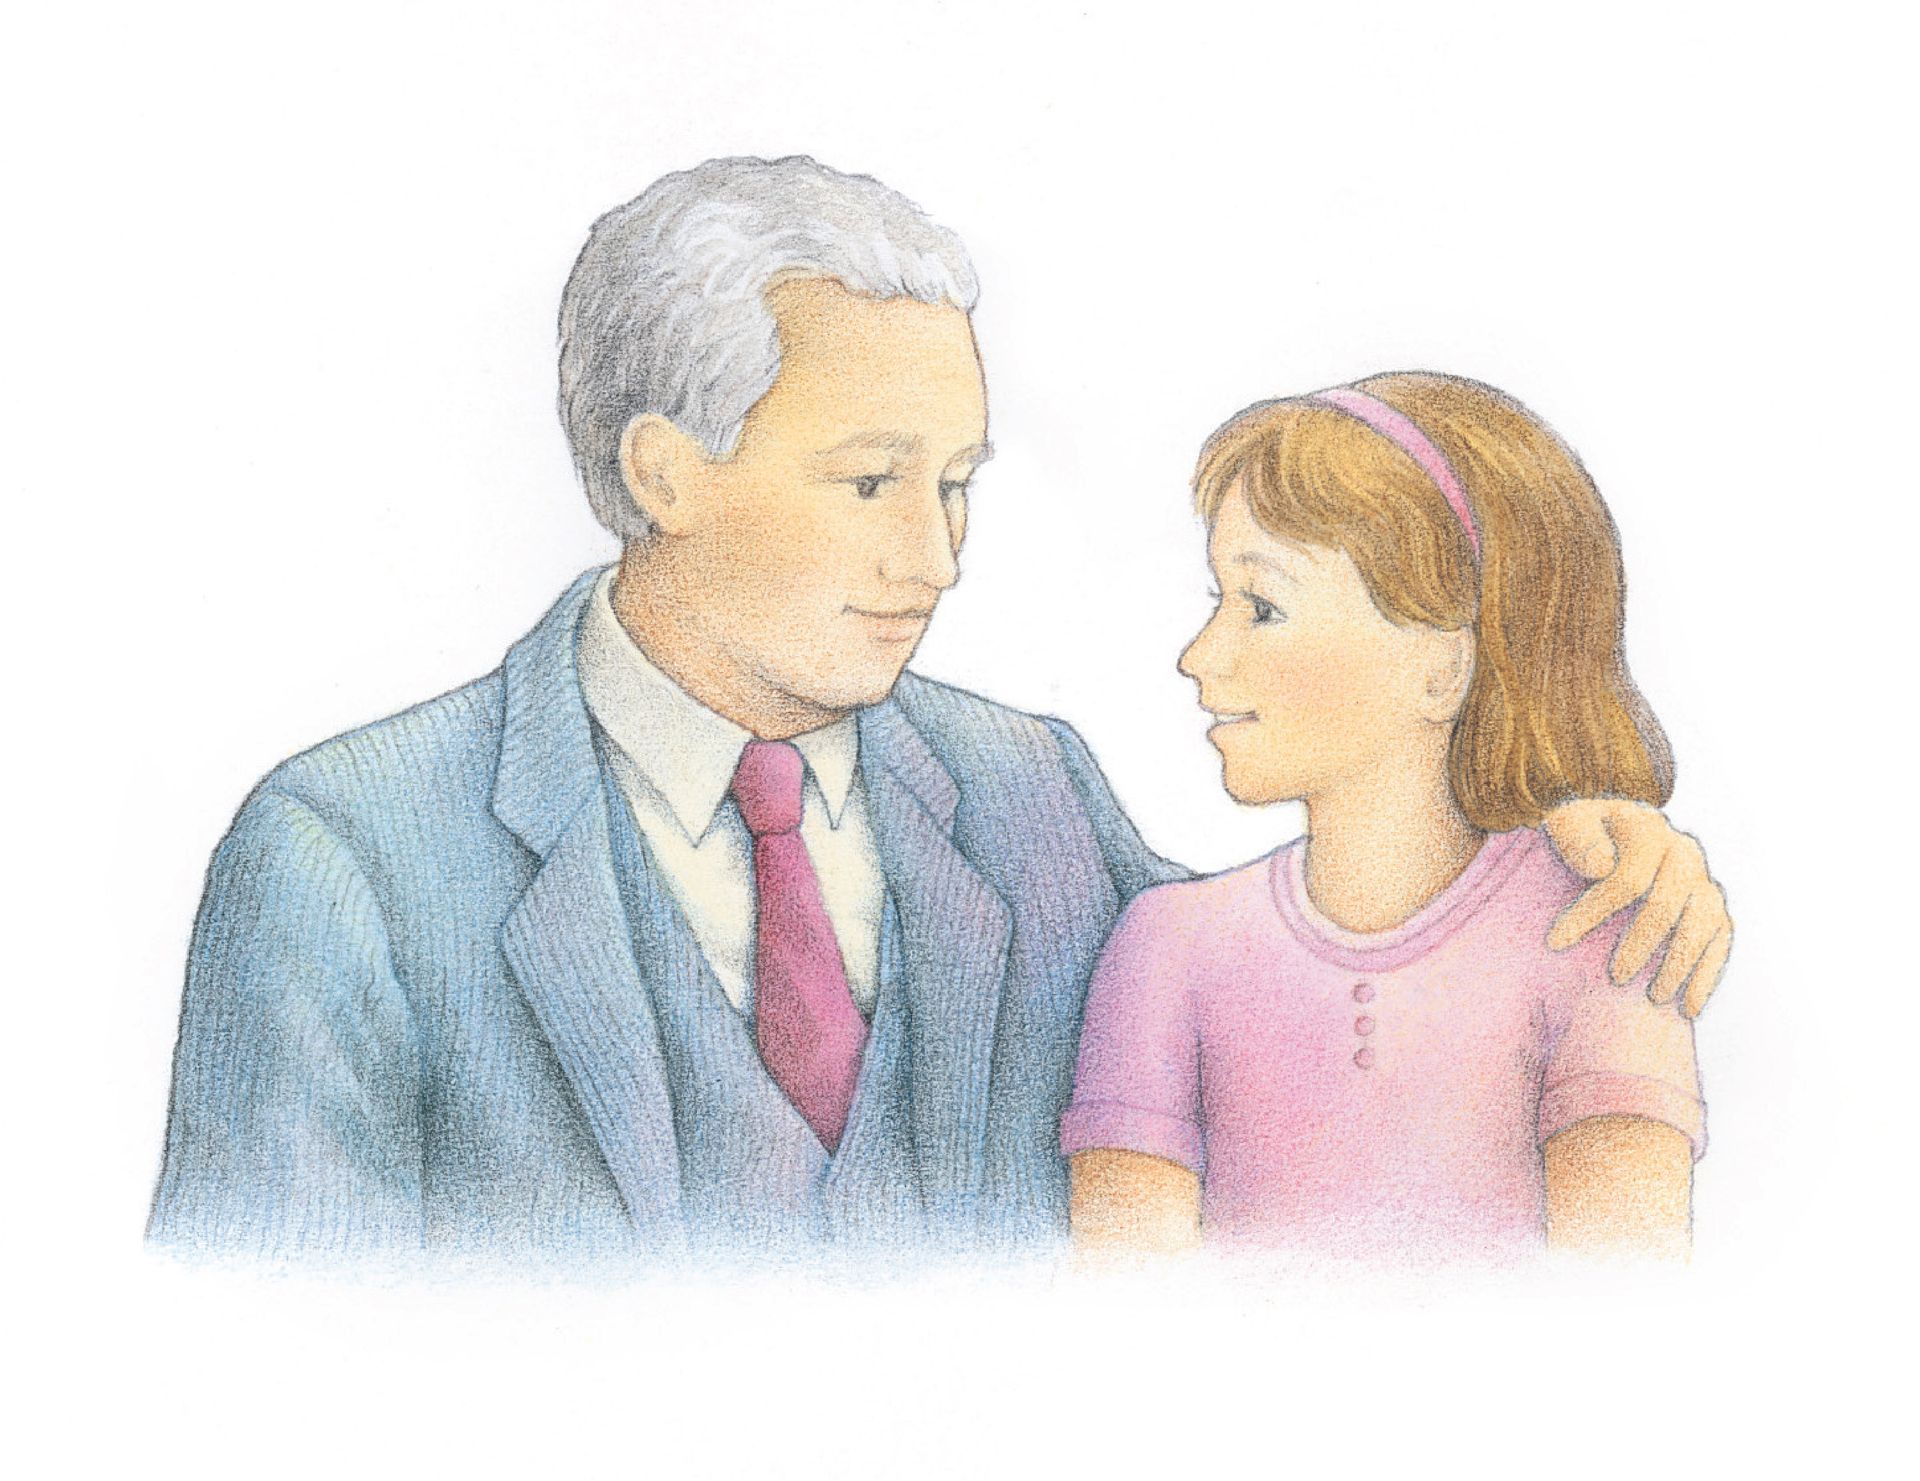 A bishop putting his arm around the shoulders of a girl in his ward. From the Children’s Songbook, page 135, “Our Bishop”; watercolor illustration by Beth Whittaker.